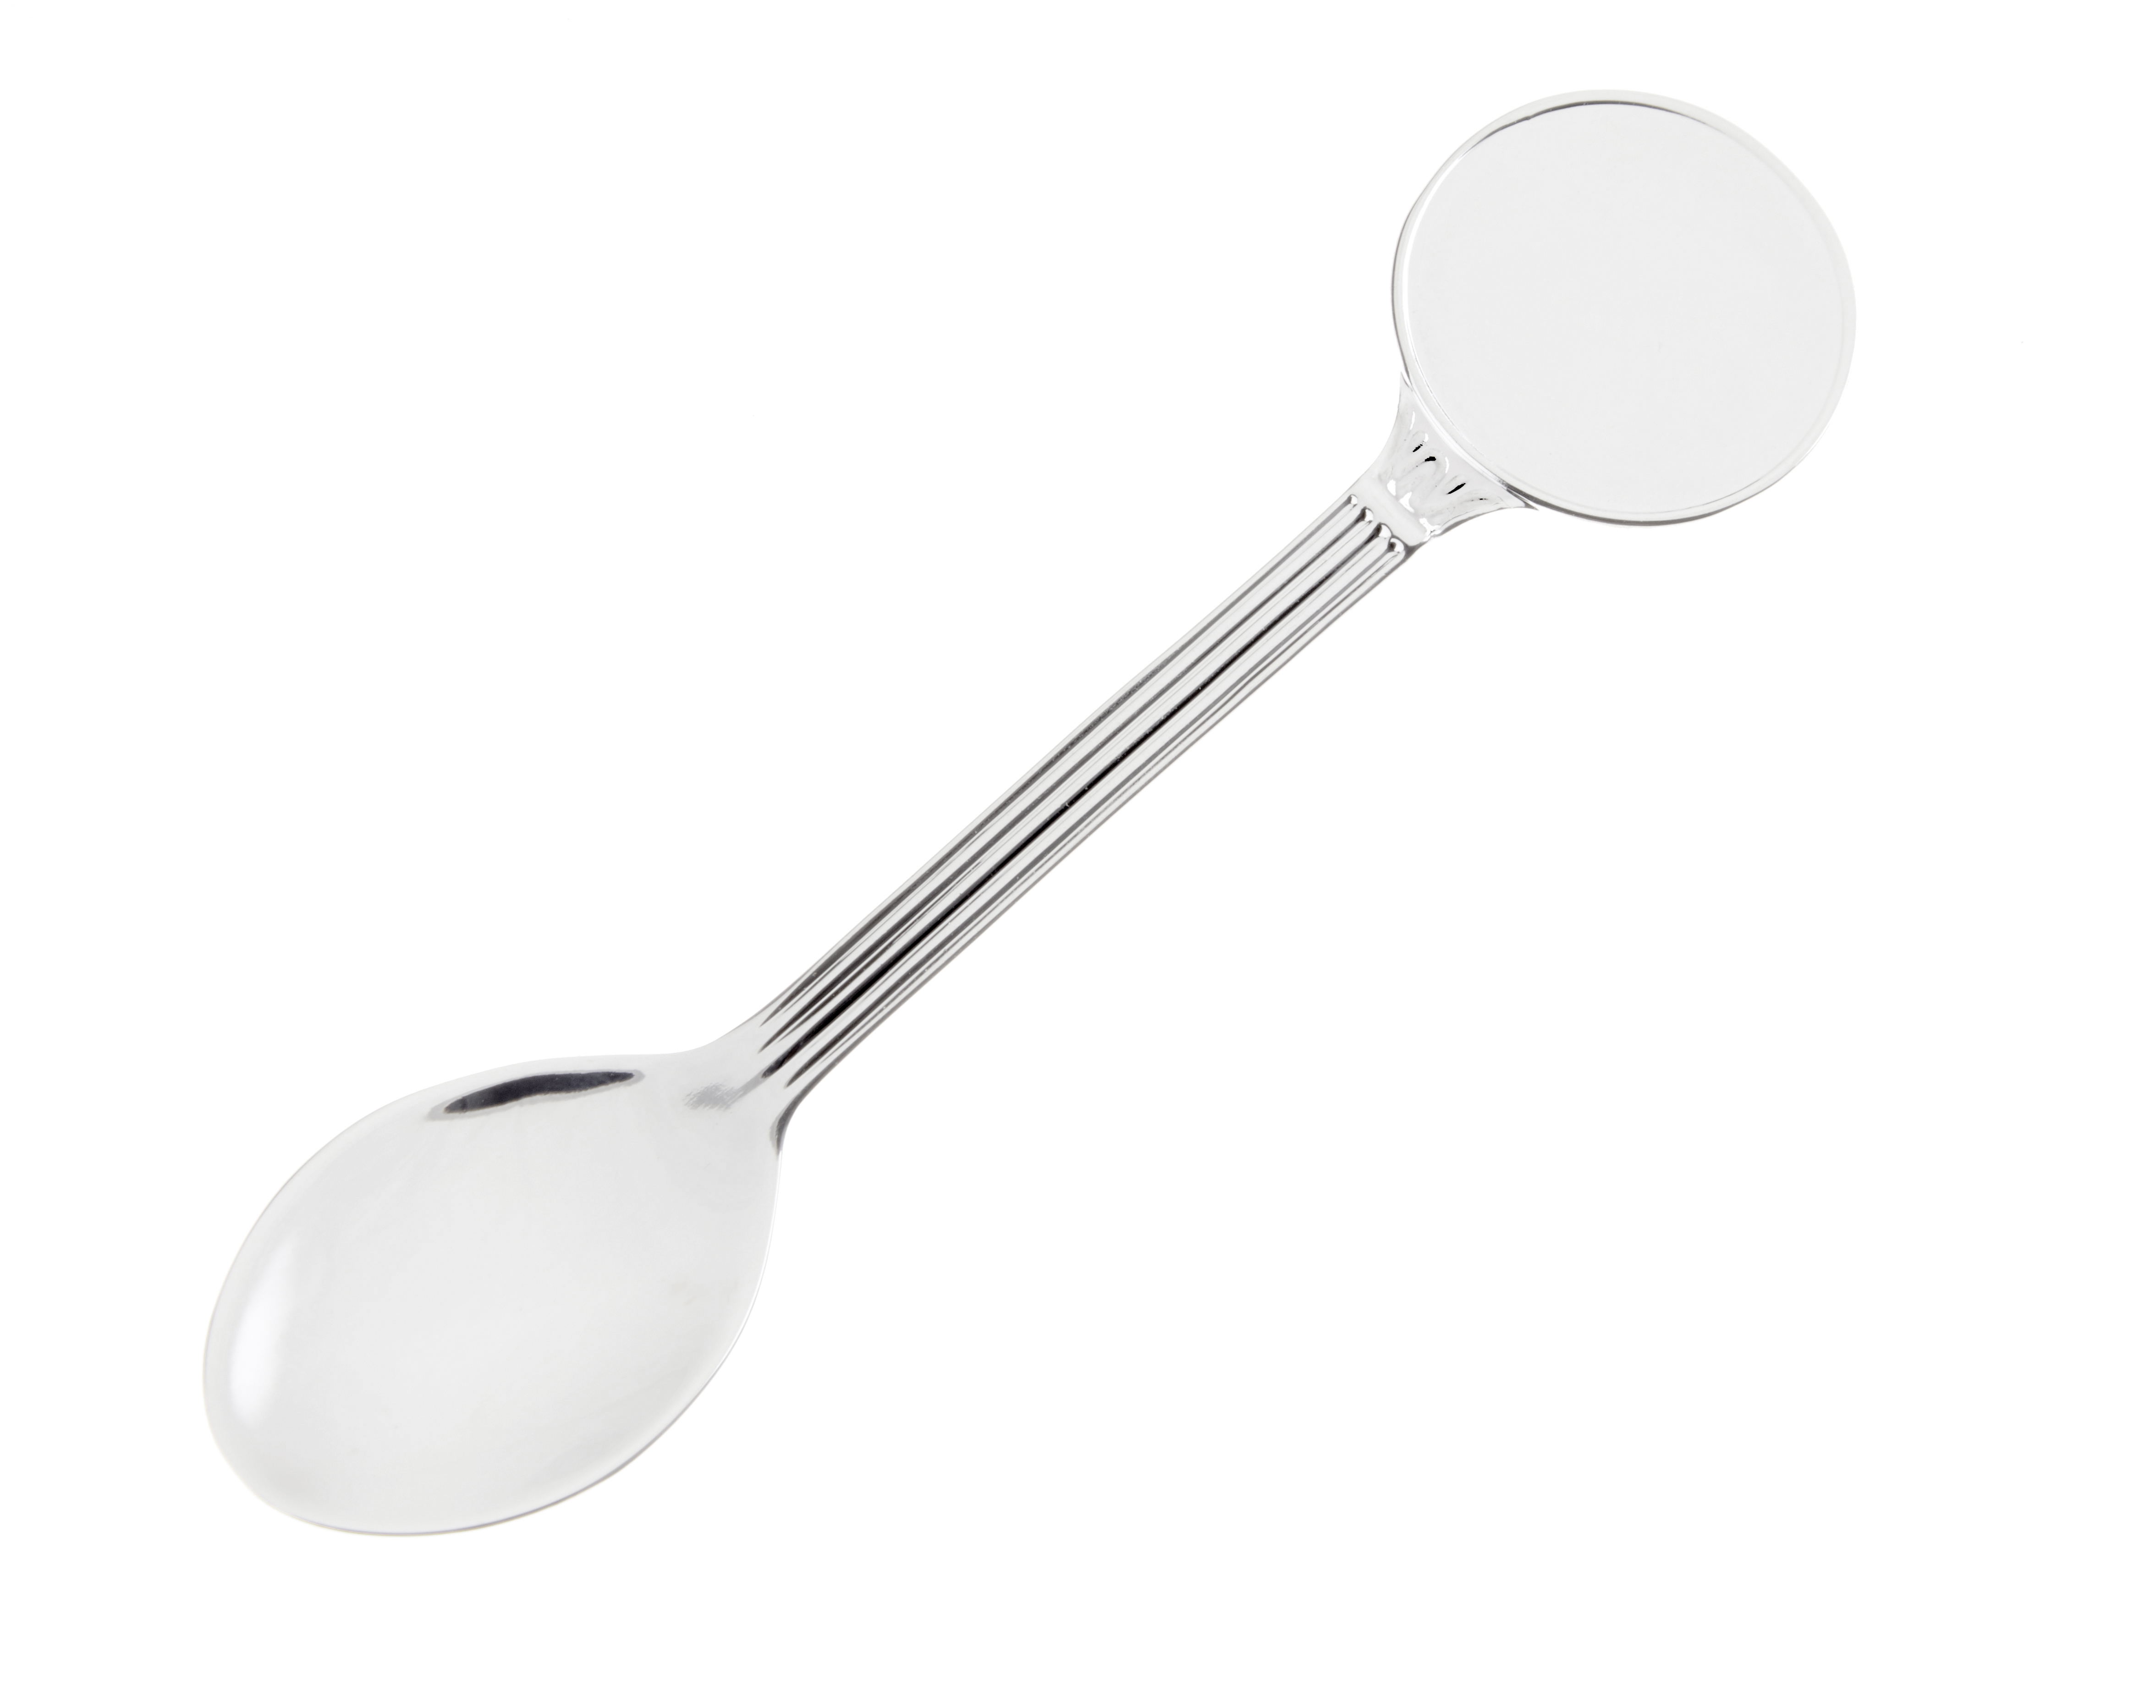 120mm Souvenir Spoon with 25mm insert silver plated